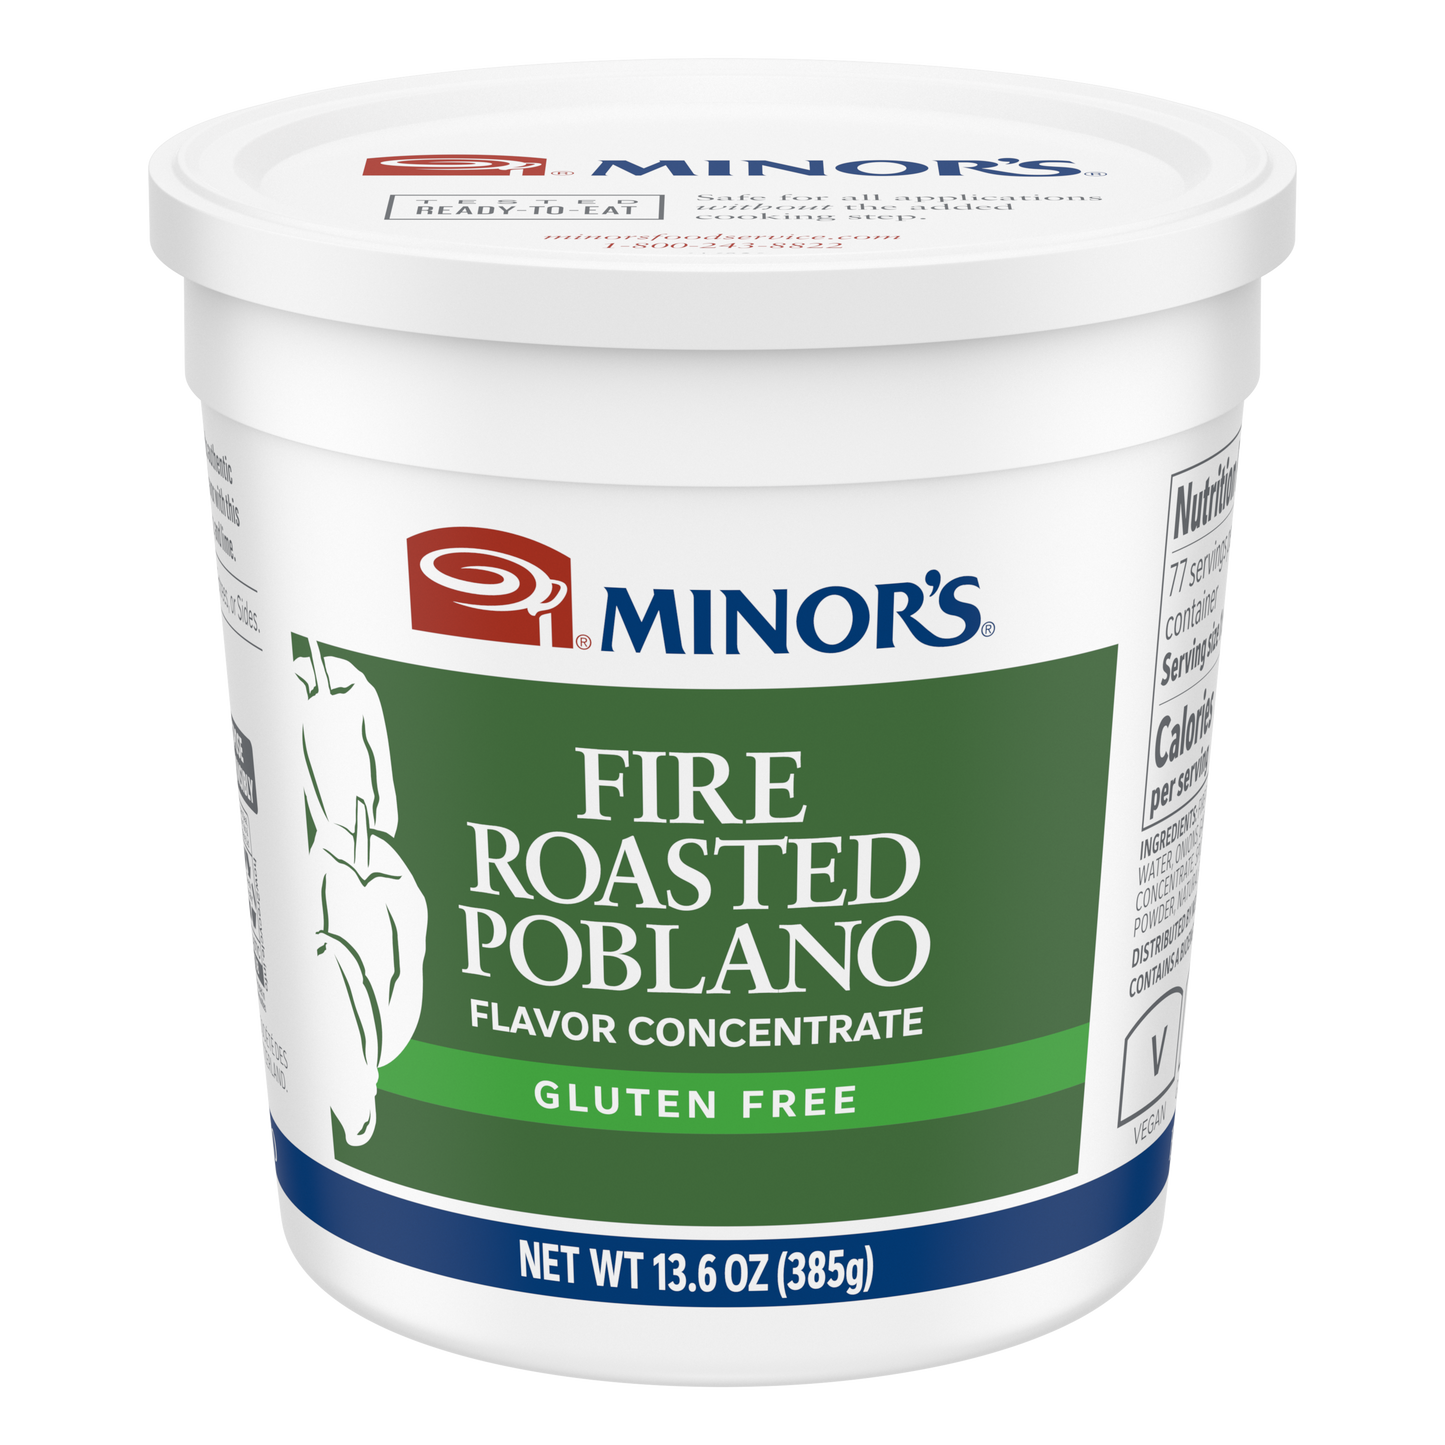 Minor's Fire Roasted Poblano Flavor Concentrate - 13.6 oz